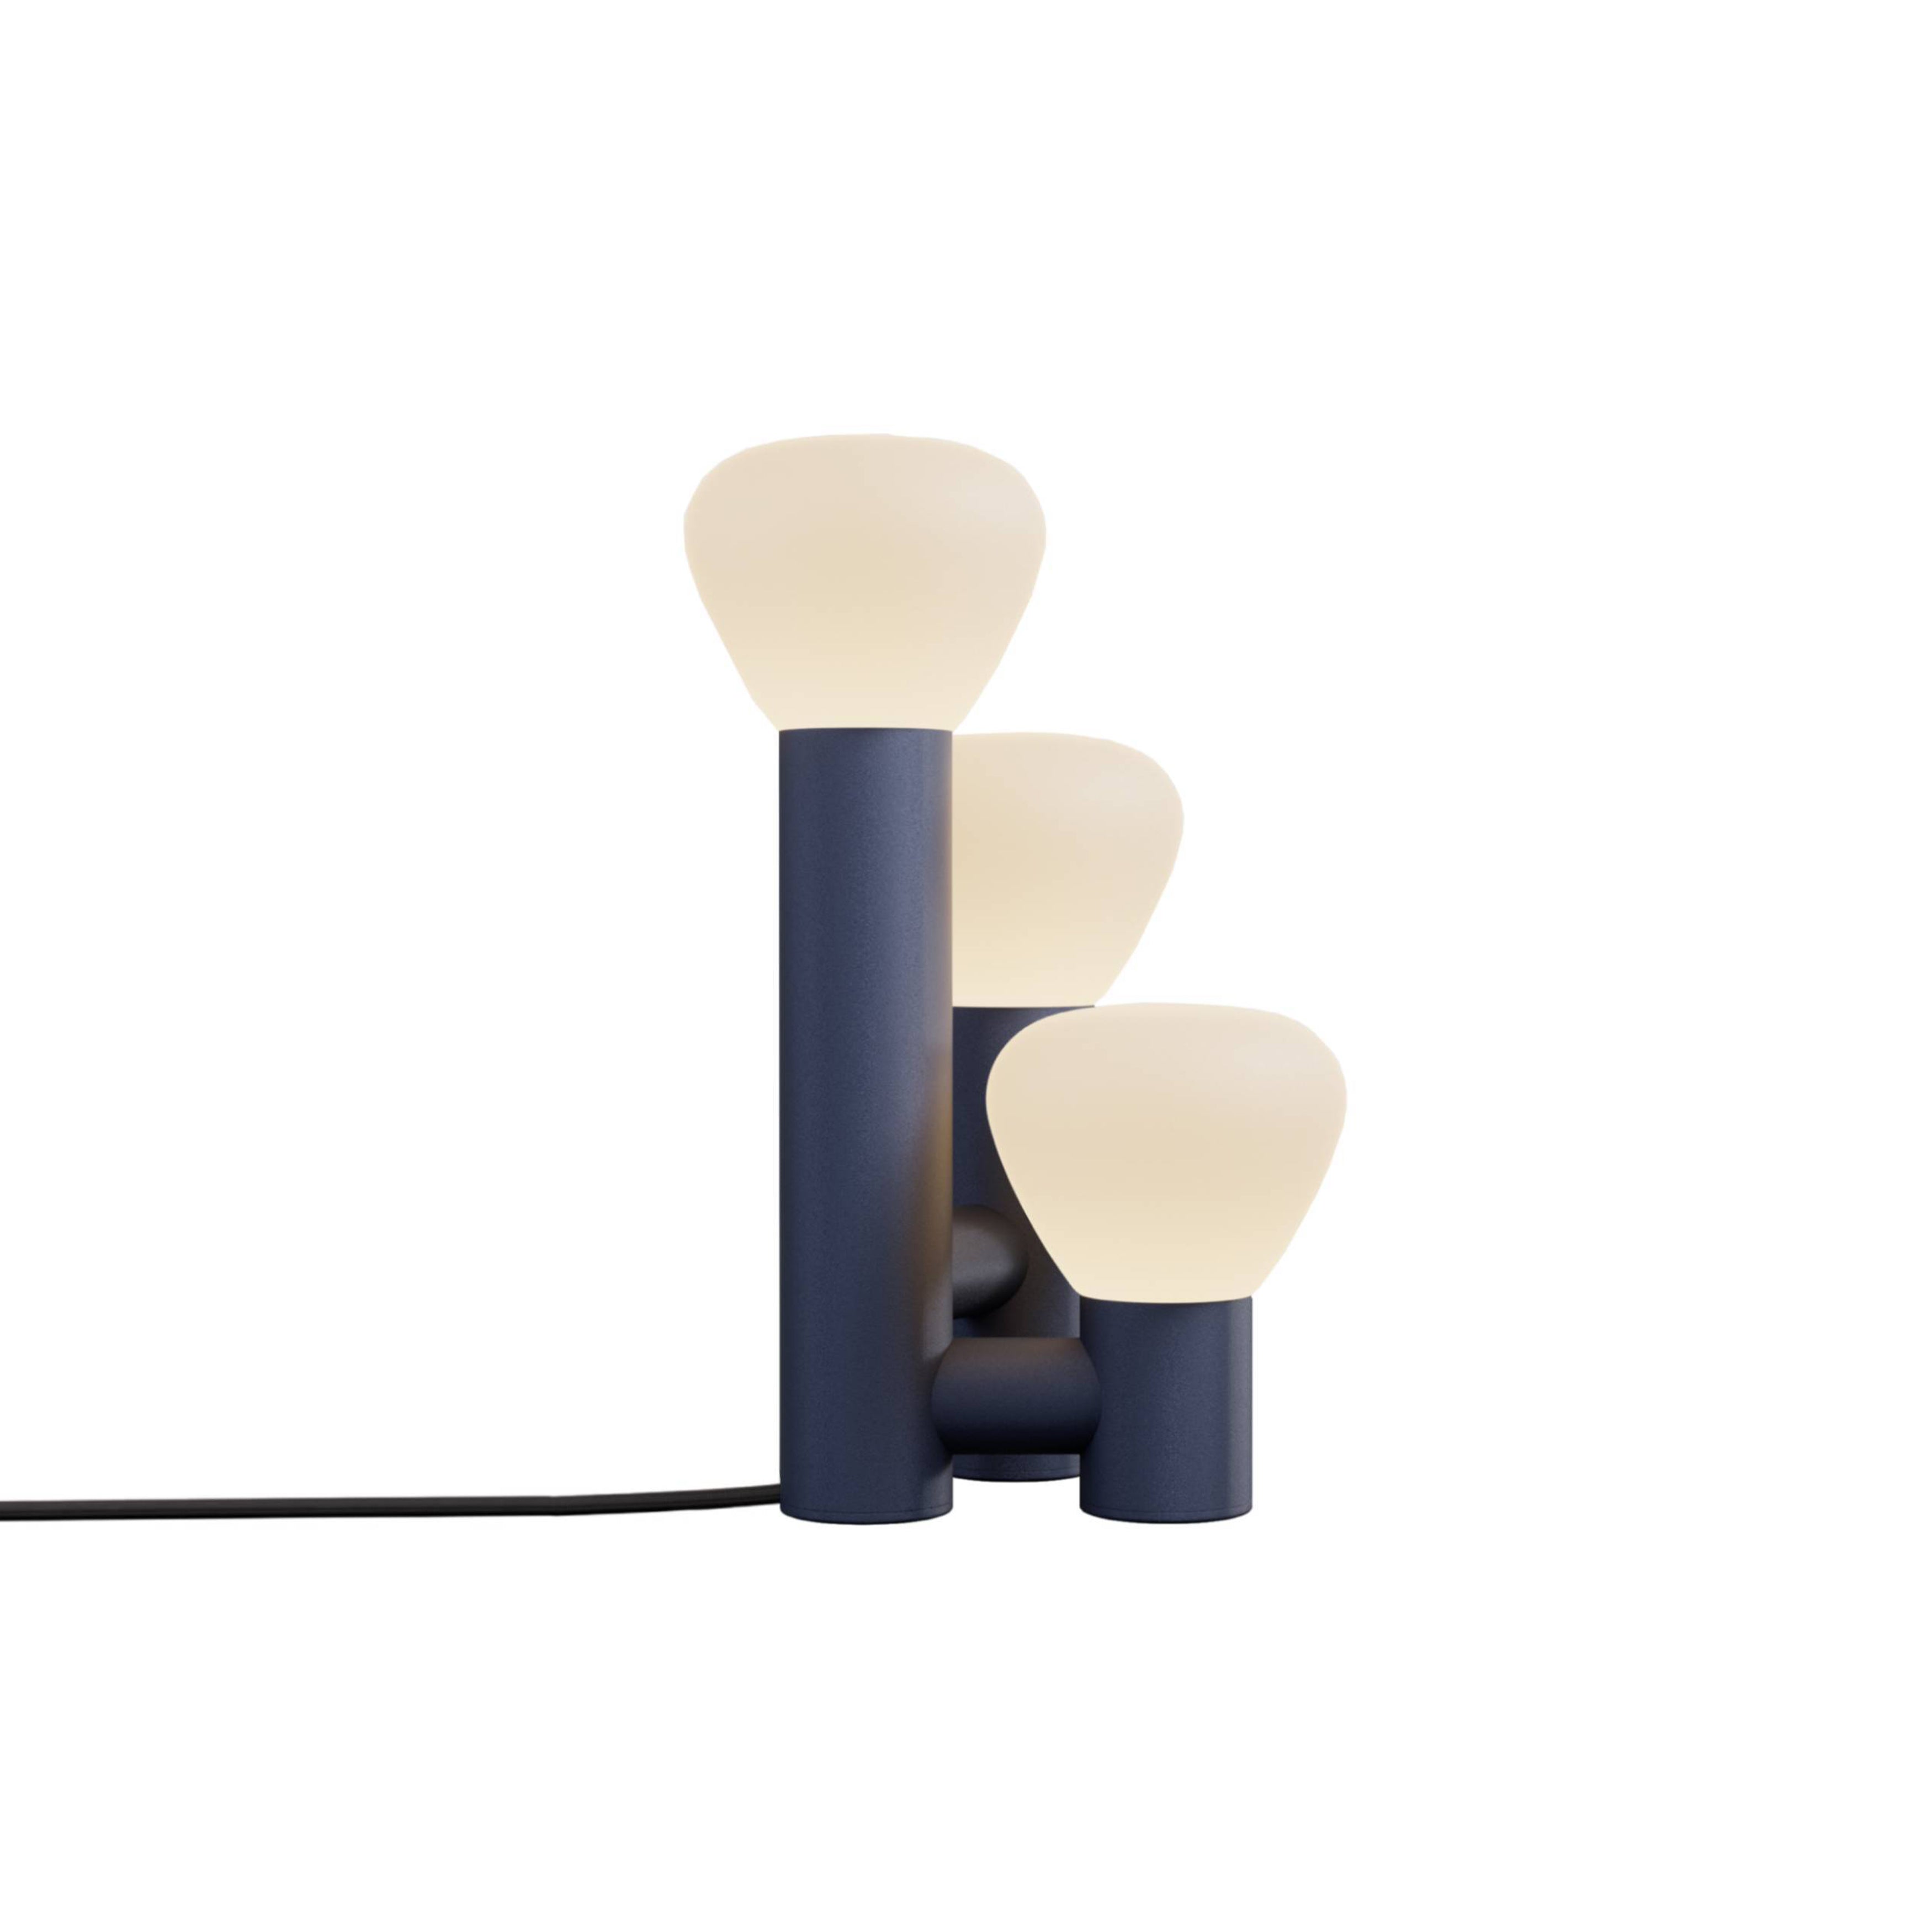 Parc 06 Table Lamp: Handswitch +  Midnight Blue + Black